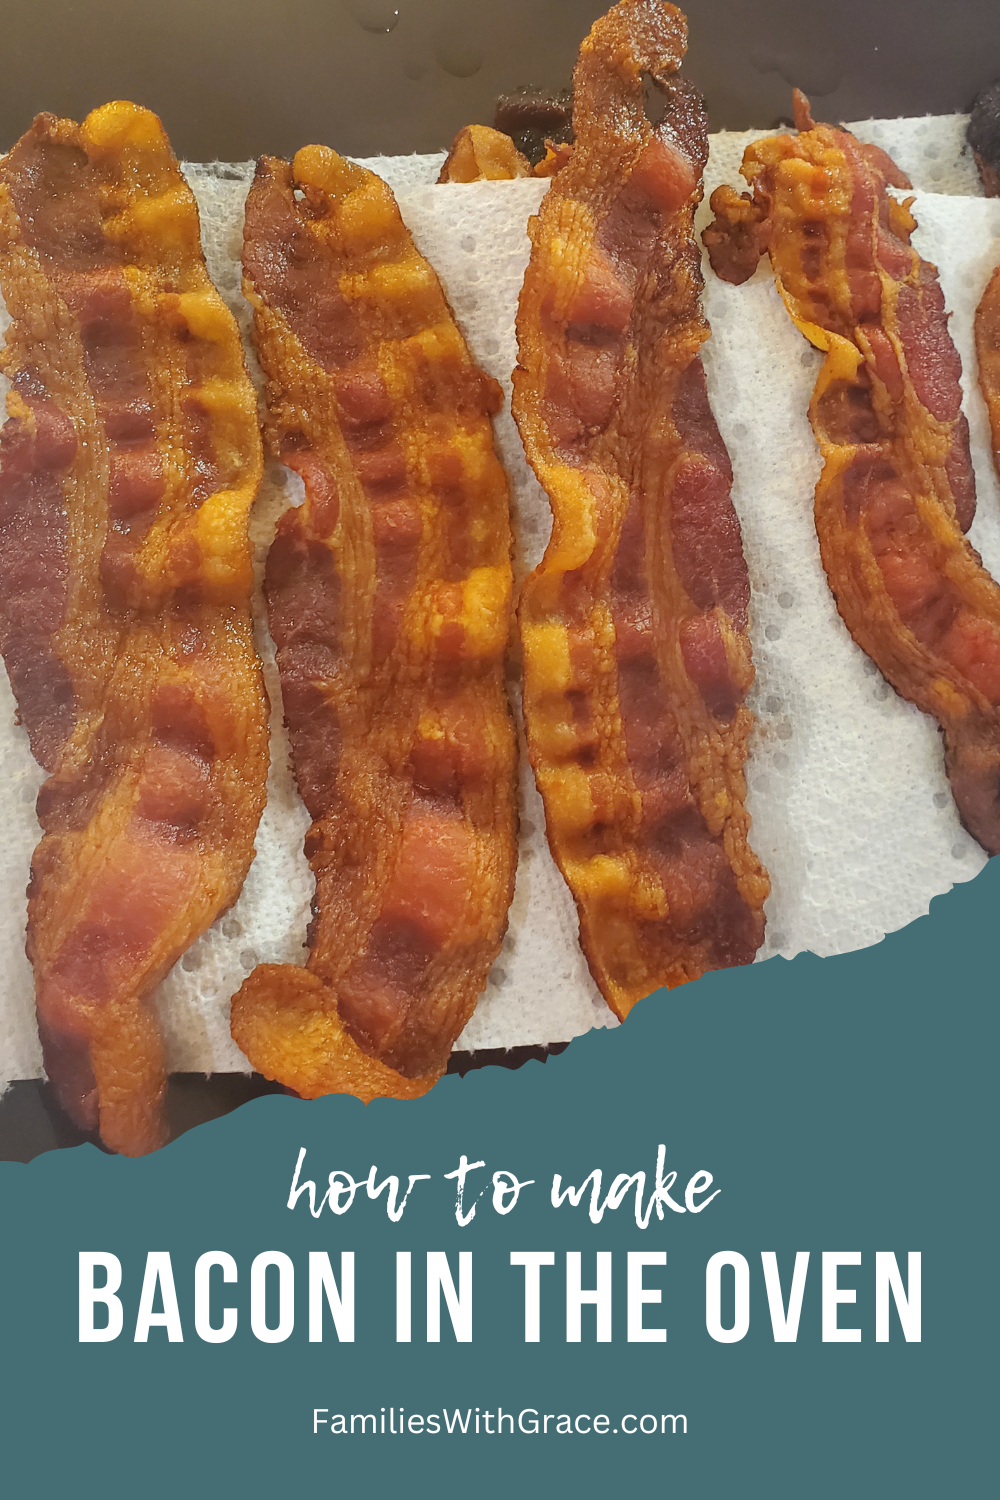 How to make bacon in the oven